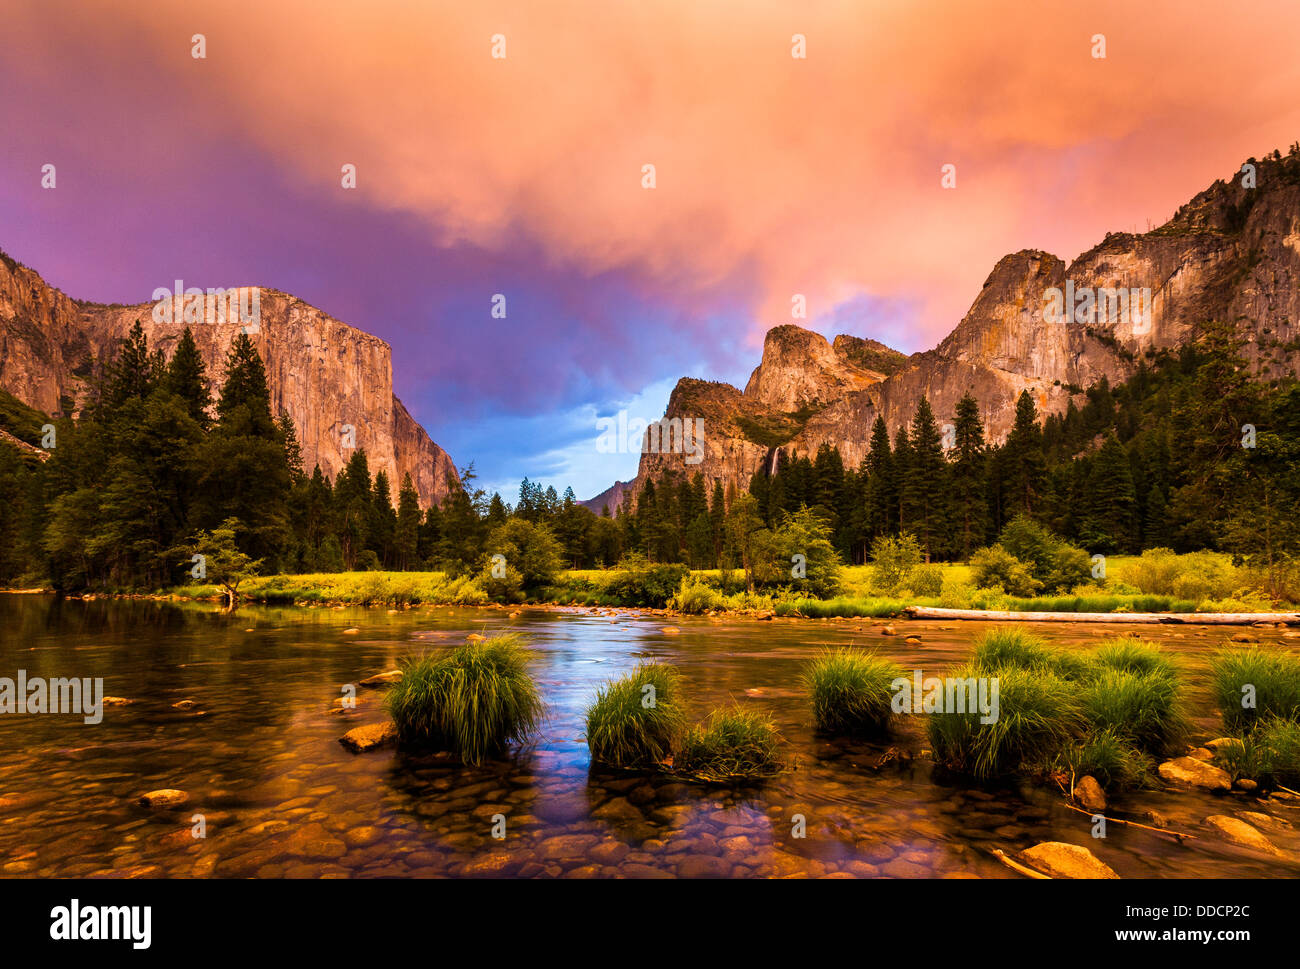 Yosemite National Park - Sunset at Gates of the Valley Stock Photo